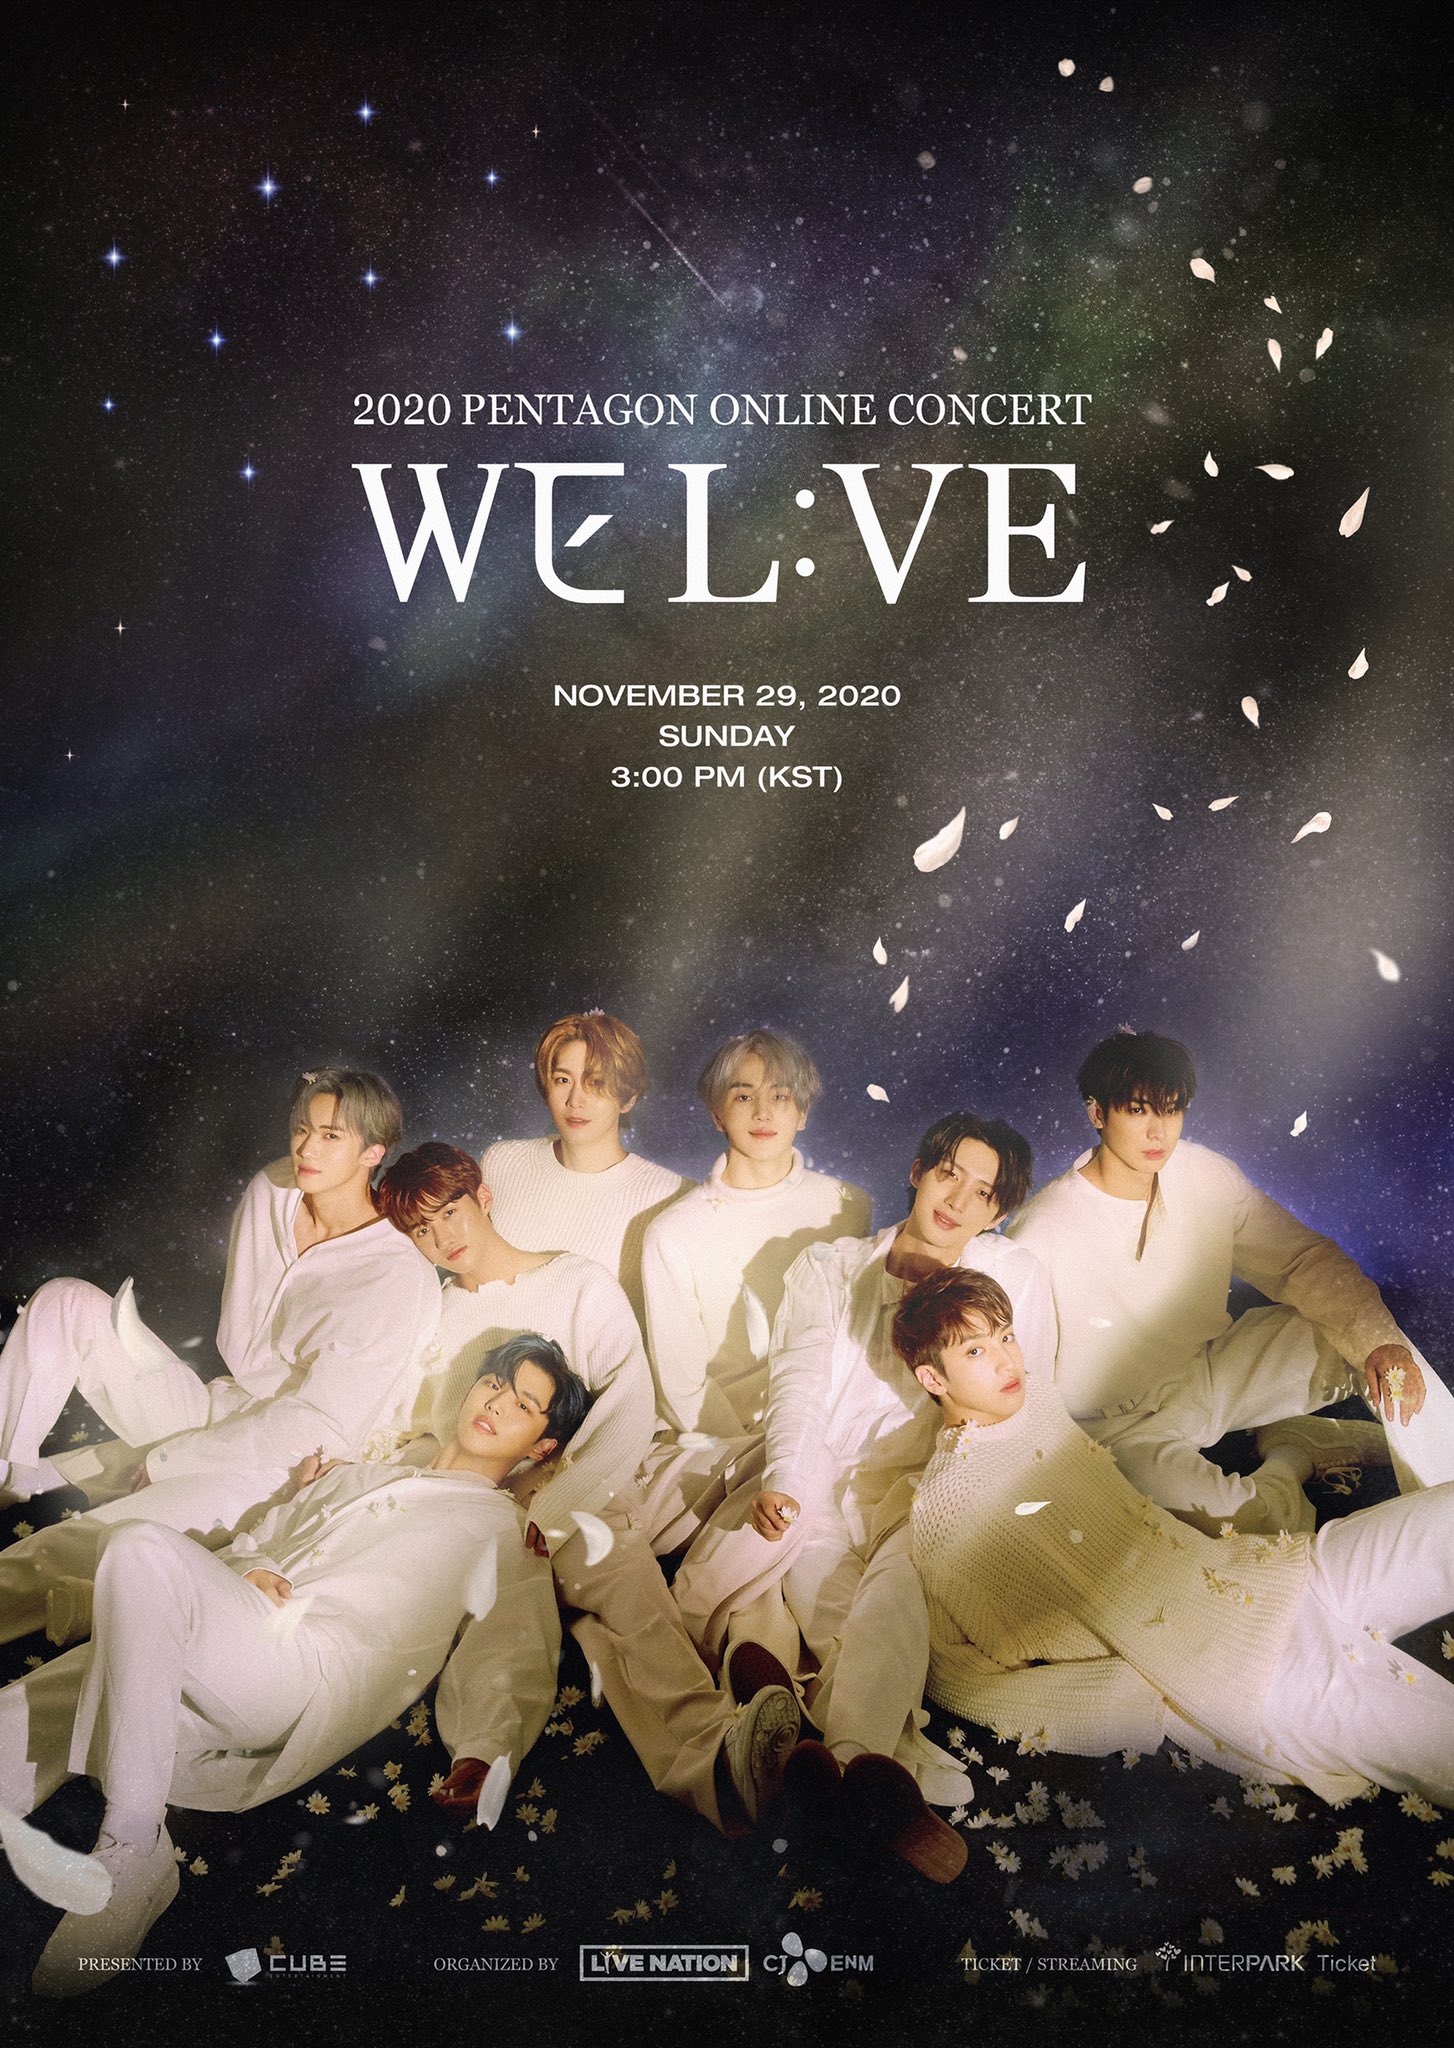 pentagon-postpones-online-concert-we-l-ve-as-yeo-one-self-quarantines-after-visiting-place-with-covid-19-case